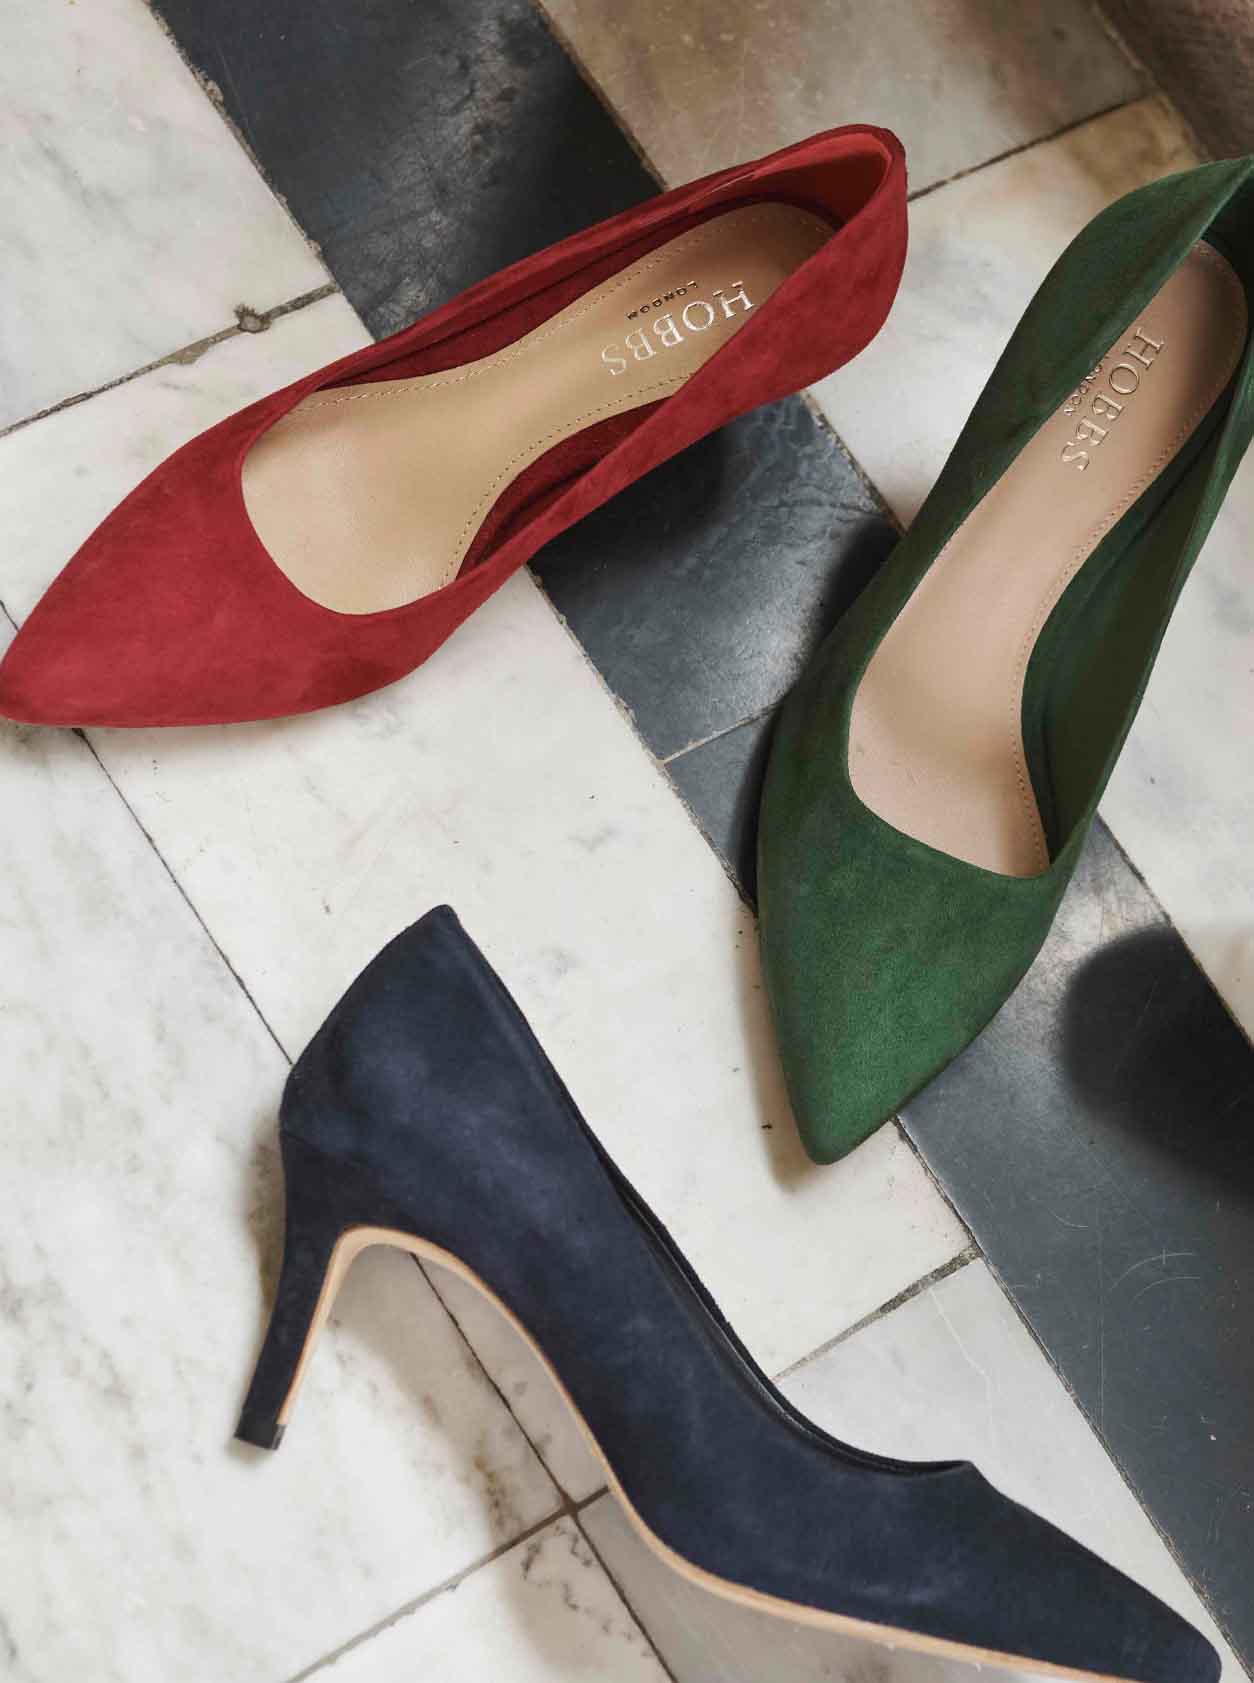 Hobbs selection of court shoes for women.